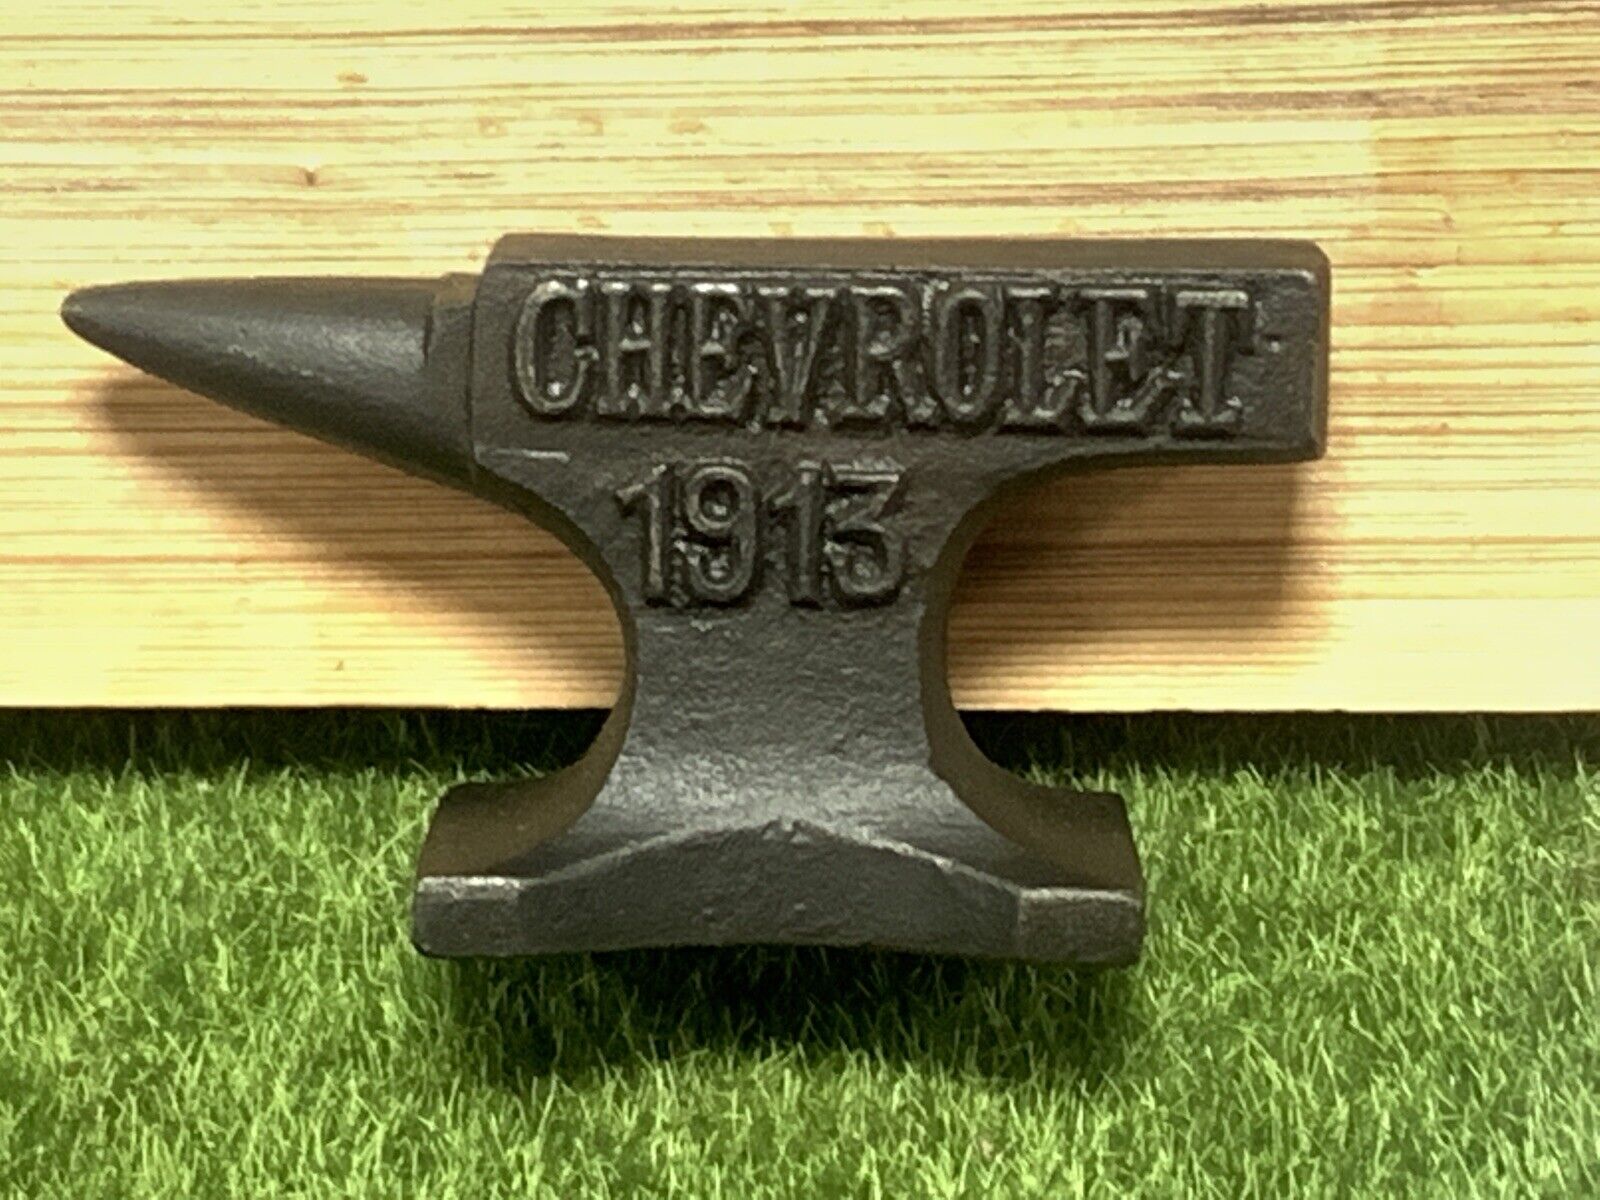 Chevrolet 1913 Anvil Collector Blacksmith Chevy Hotrod Iron Paperweight Mancave